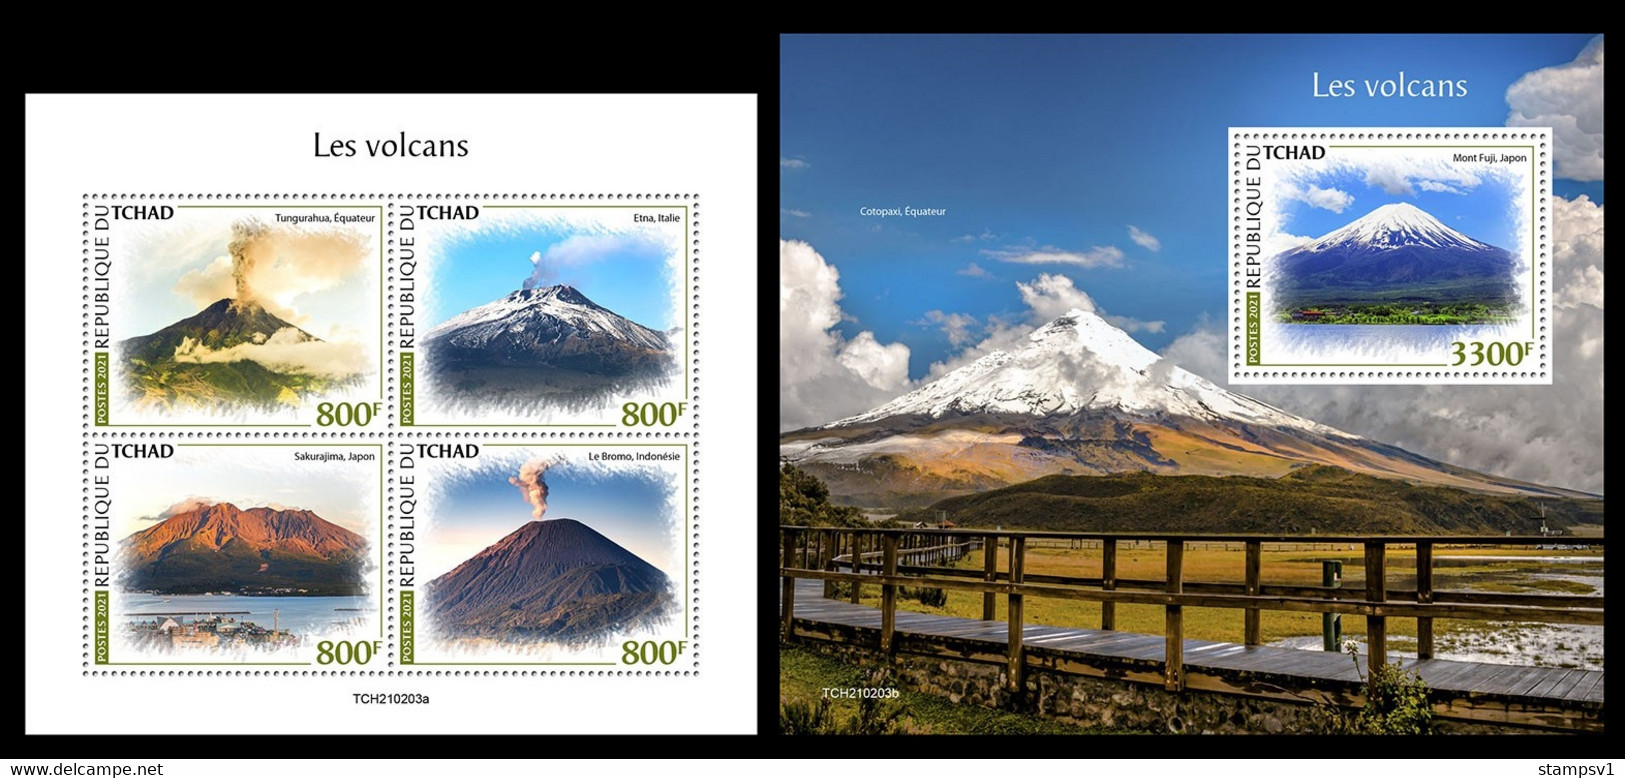 Chad 2021 Volcanoes. (203) OFFICIAL ISSUE - Volcans